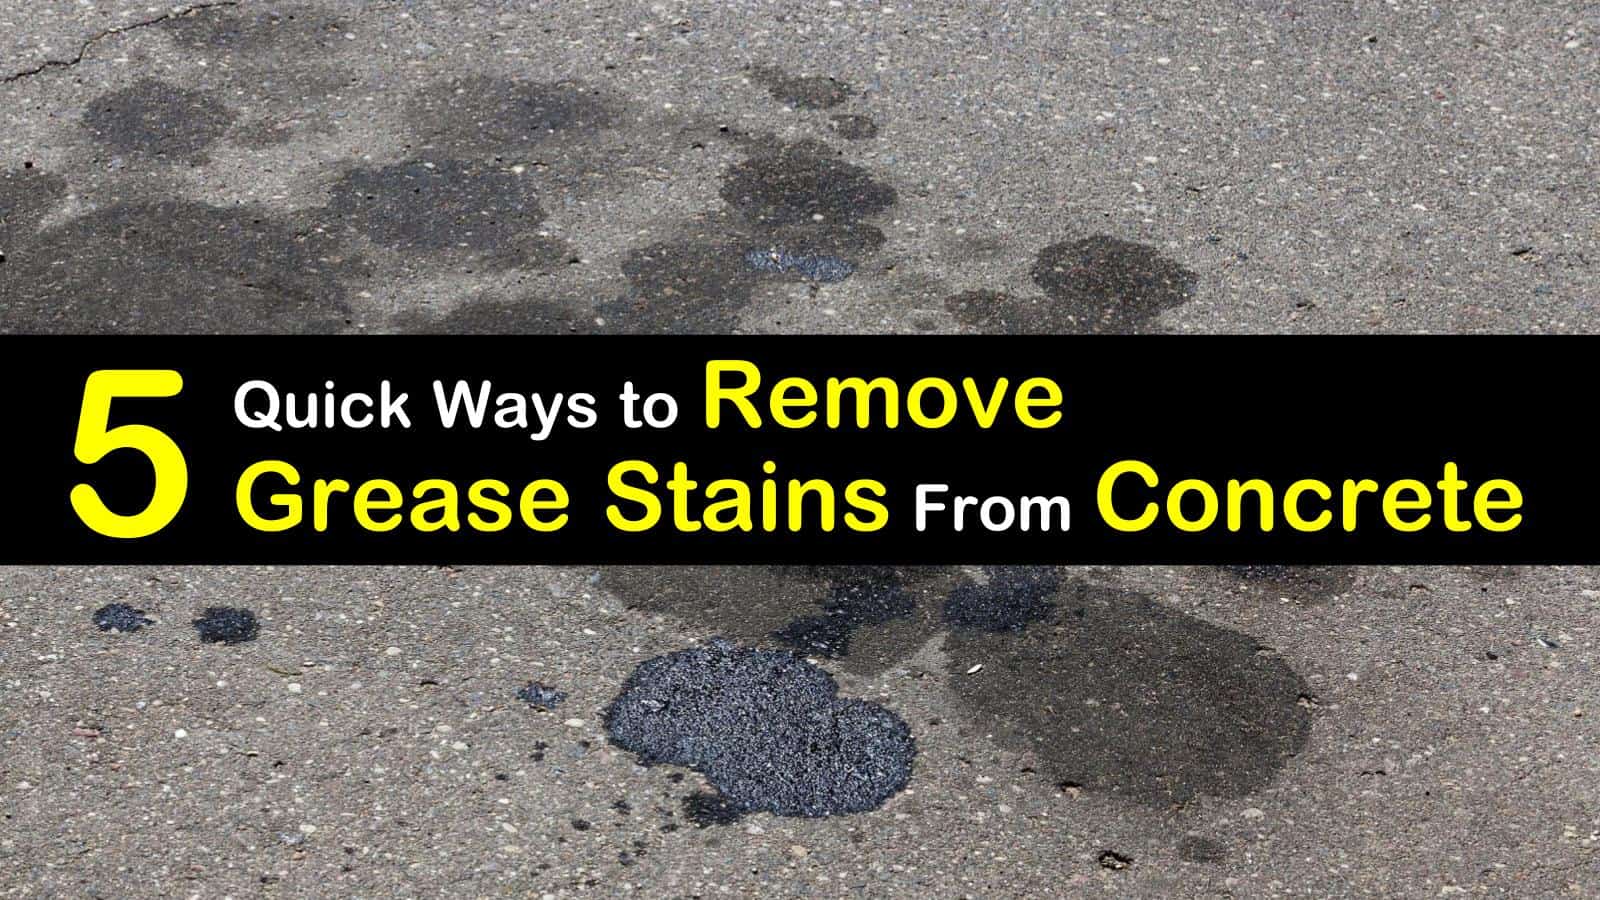 How to Remove Grease Stains from Concrete